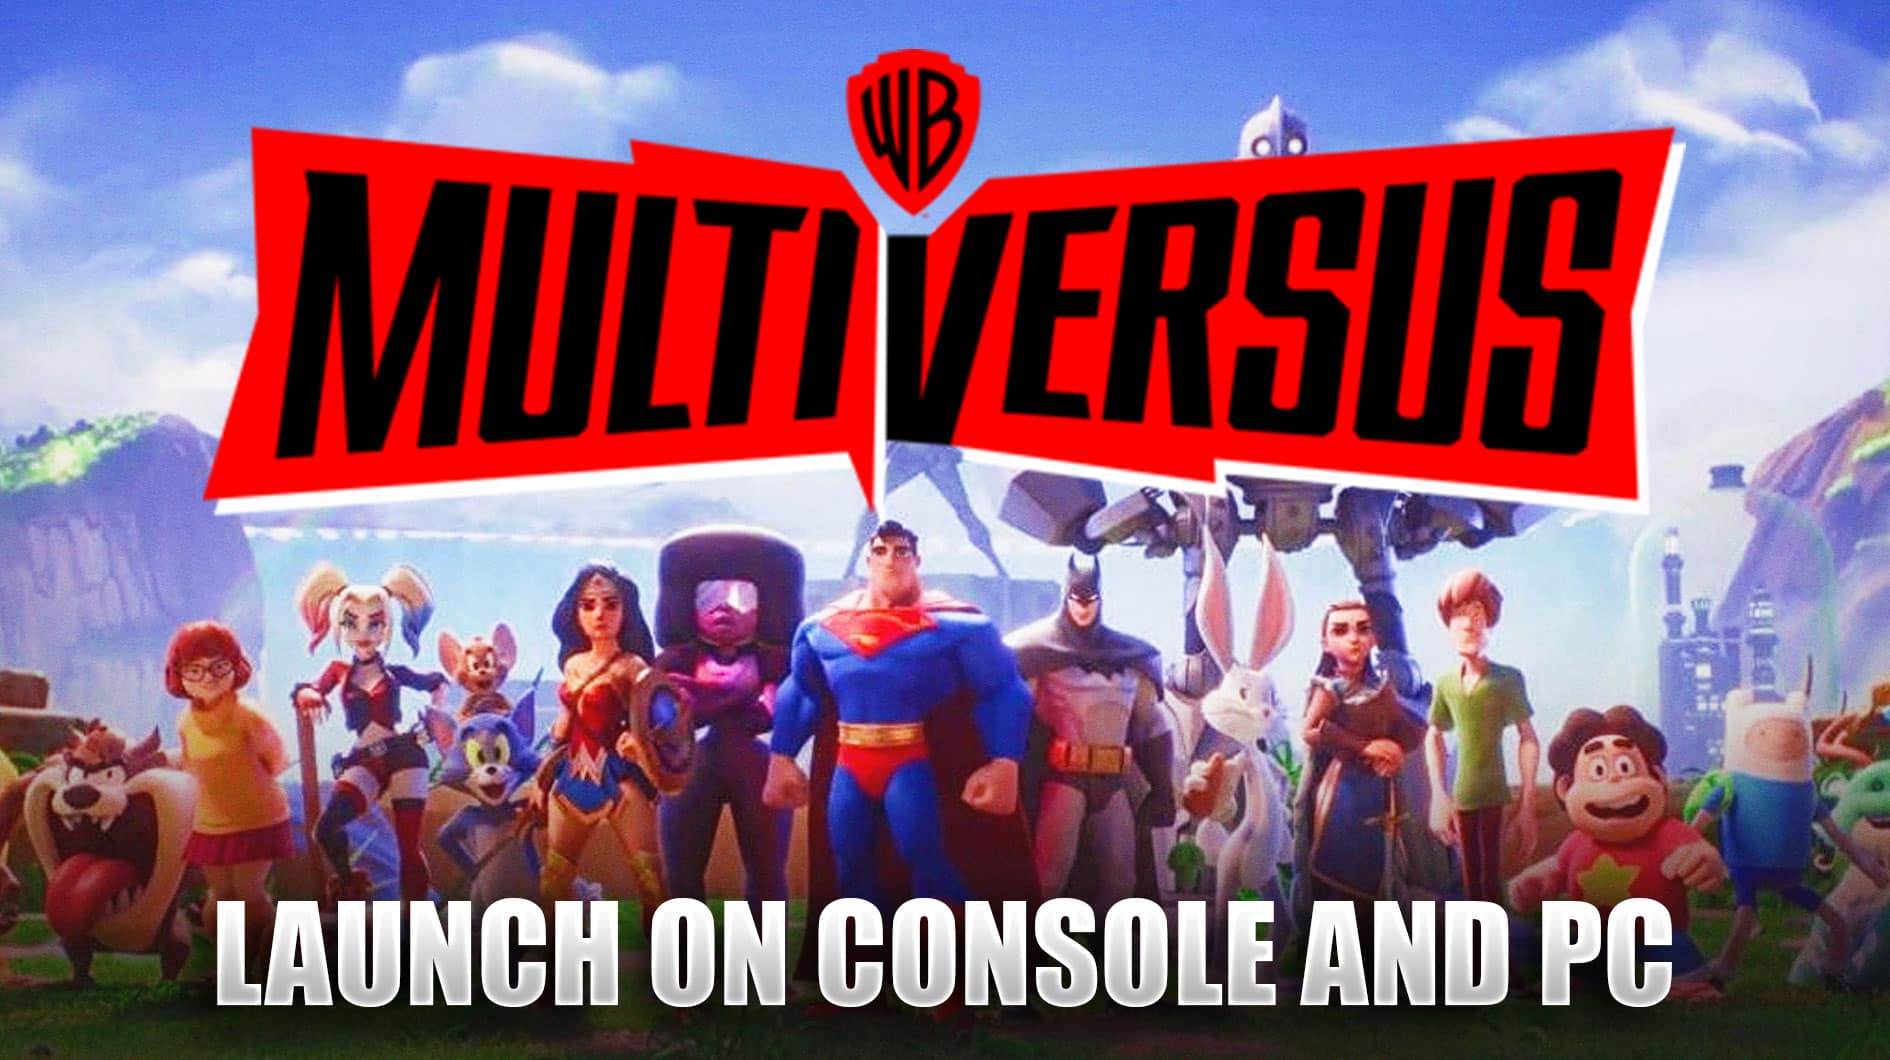 MultiVersus Launches on Console and PC